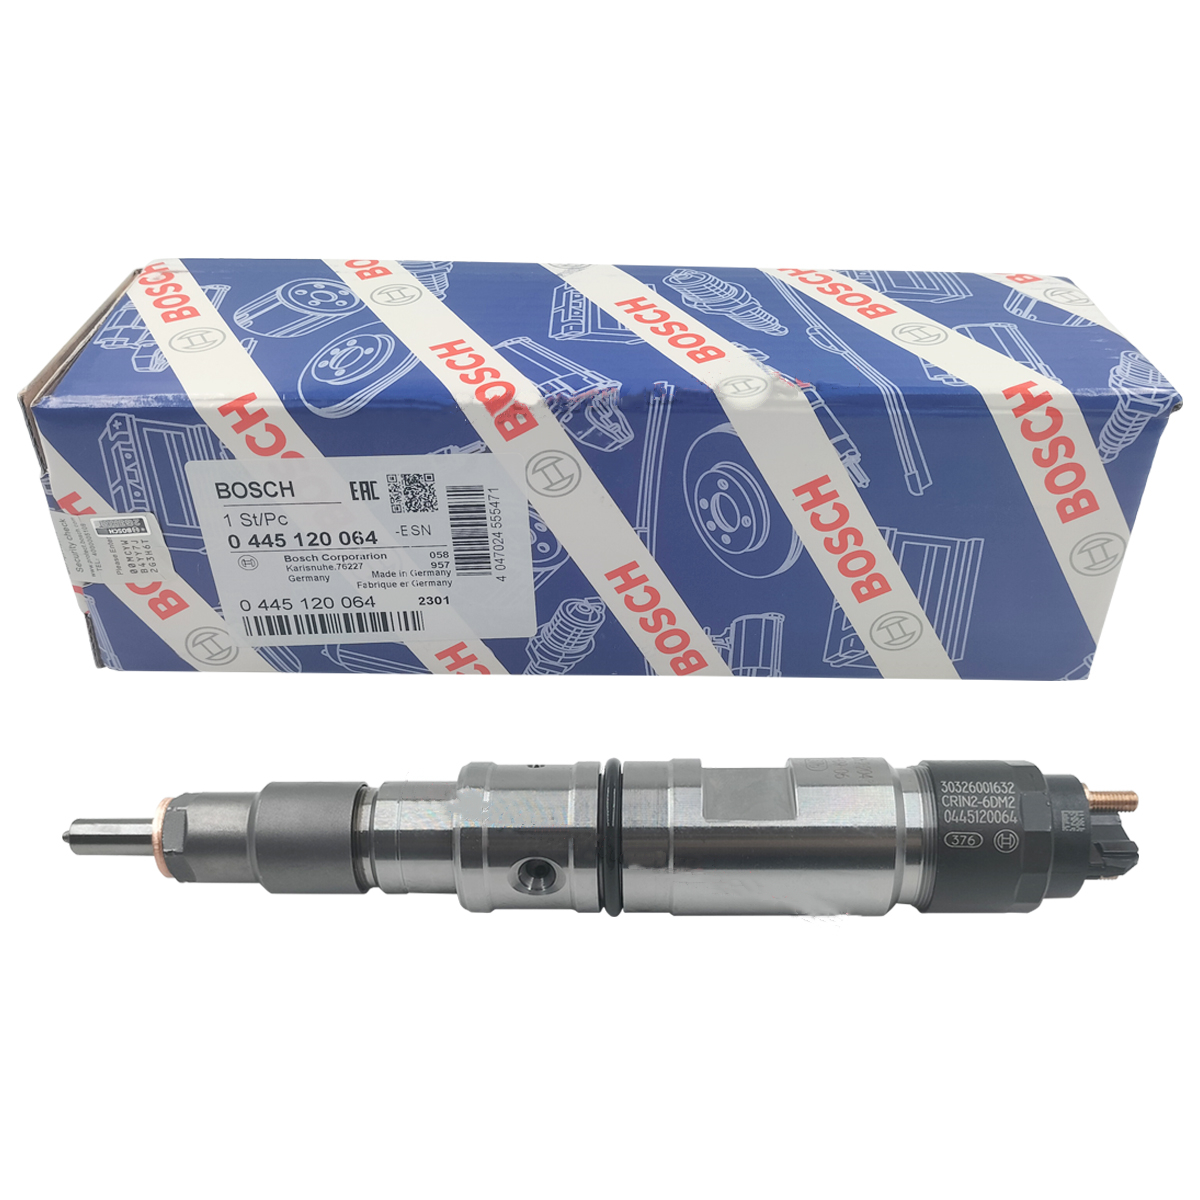 GENUINE AND BRAND NEW DIESEL FUEL COMMON RAIL INJECTOR 0445120345, 0491-5316, 0445120064 FOR EC350D, D8K ENGINE